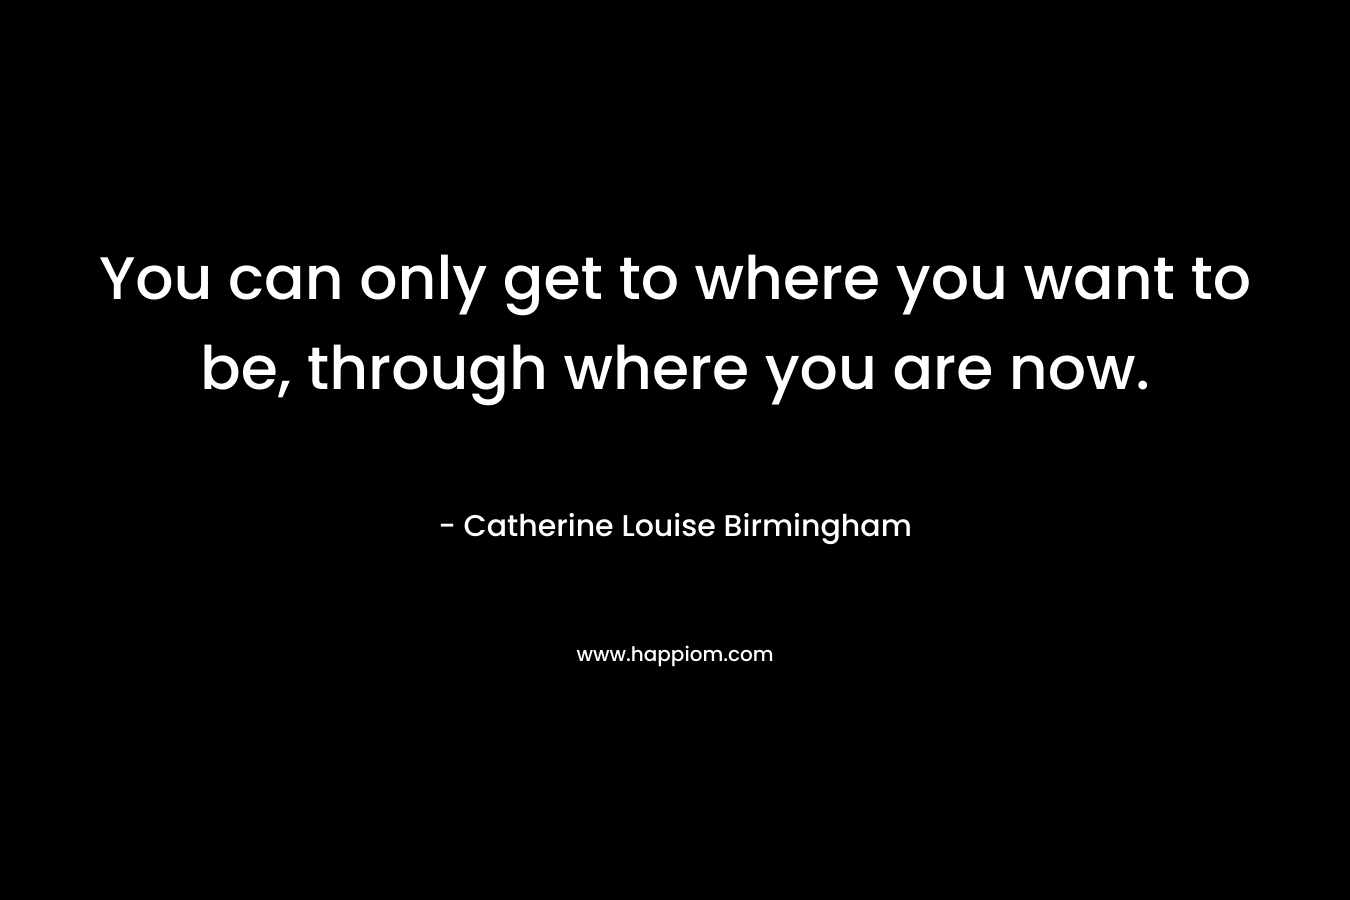 You can only get to where you want to be, through where you are now.